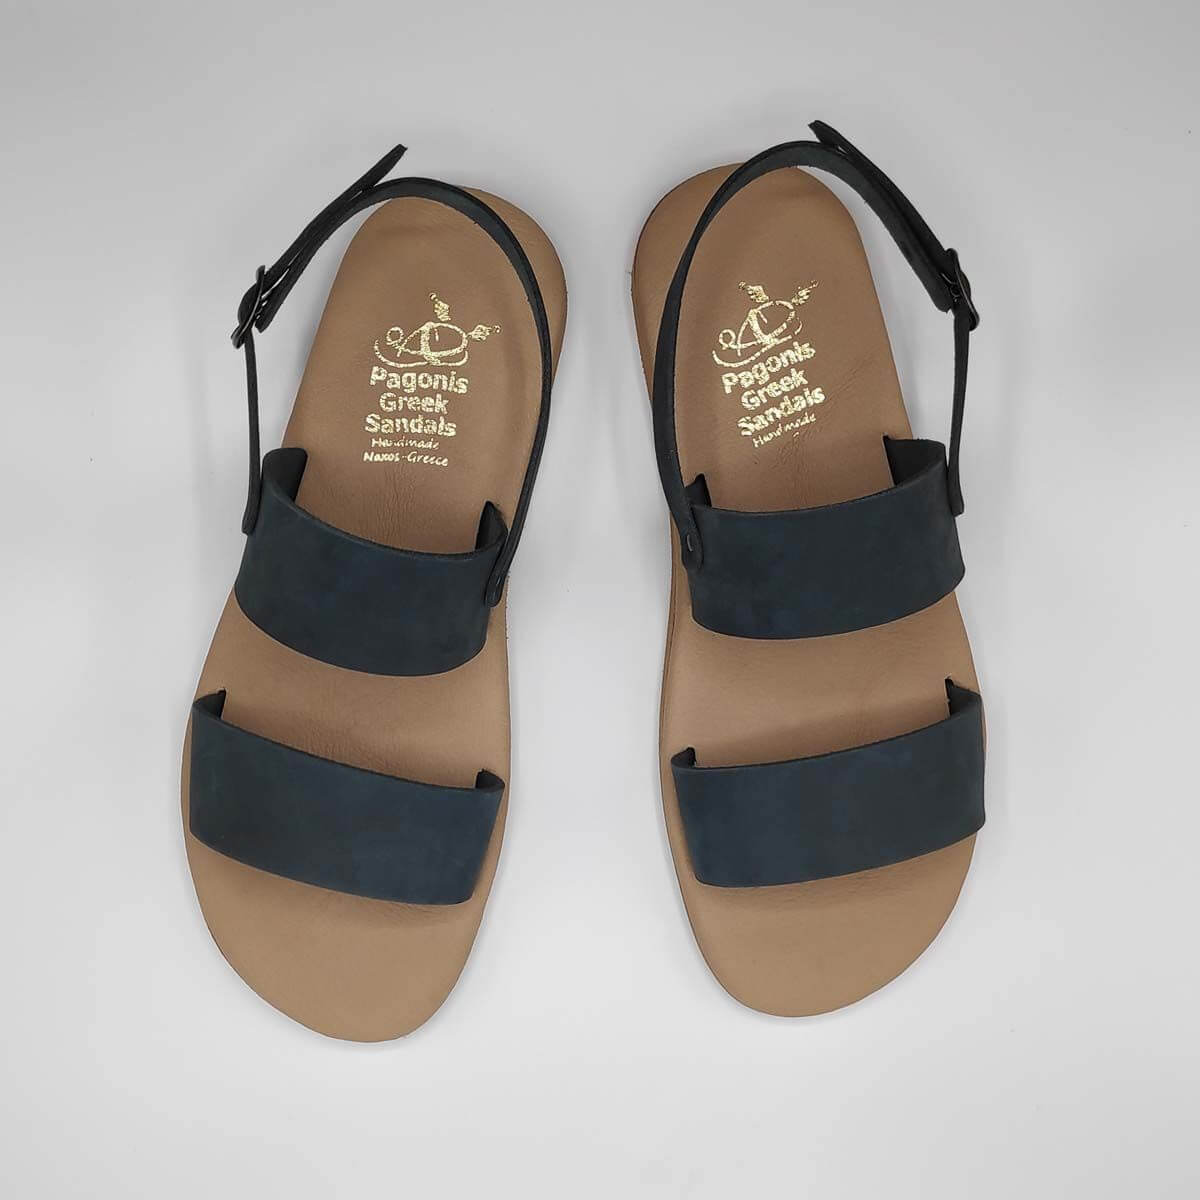 comfortable sandals with backstrap